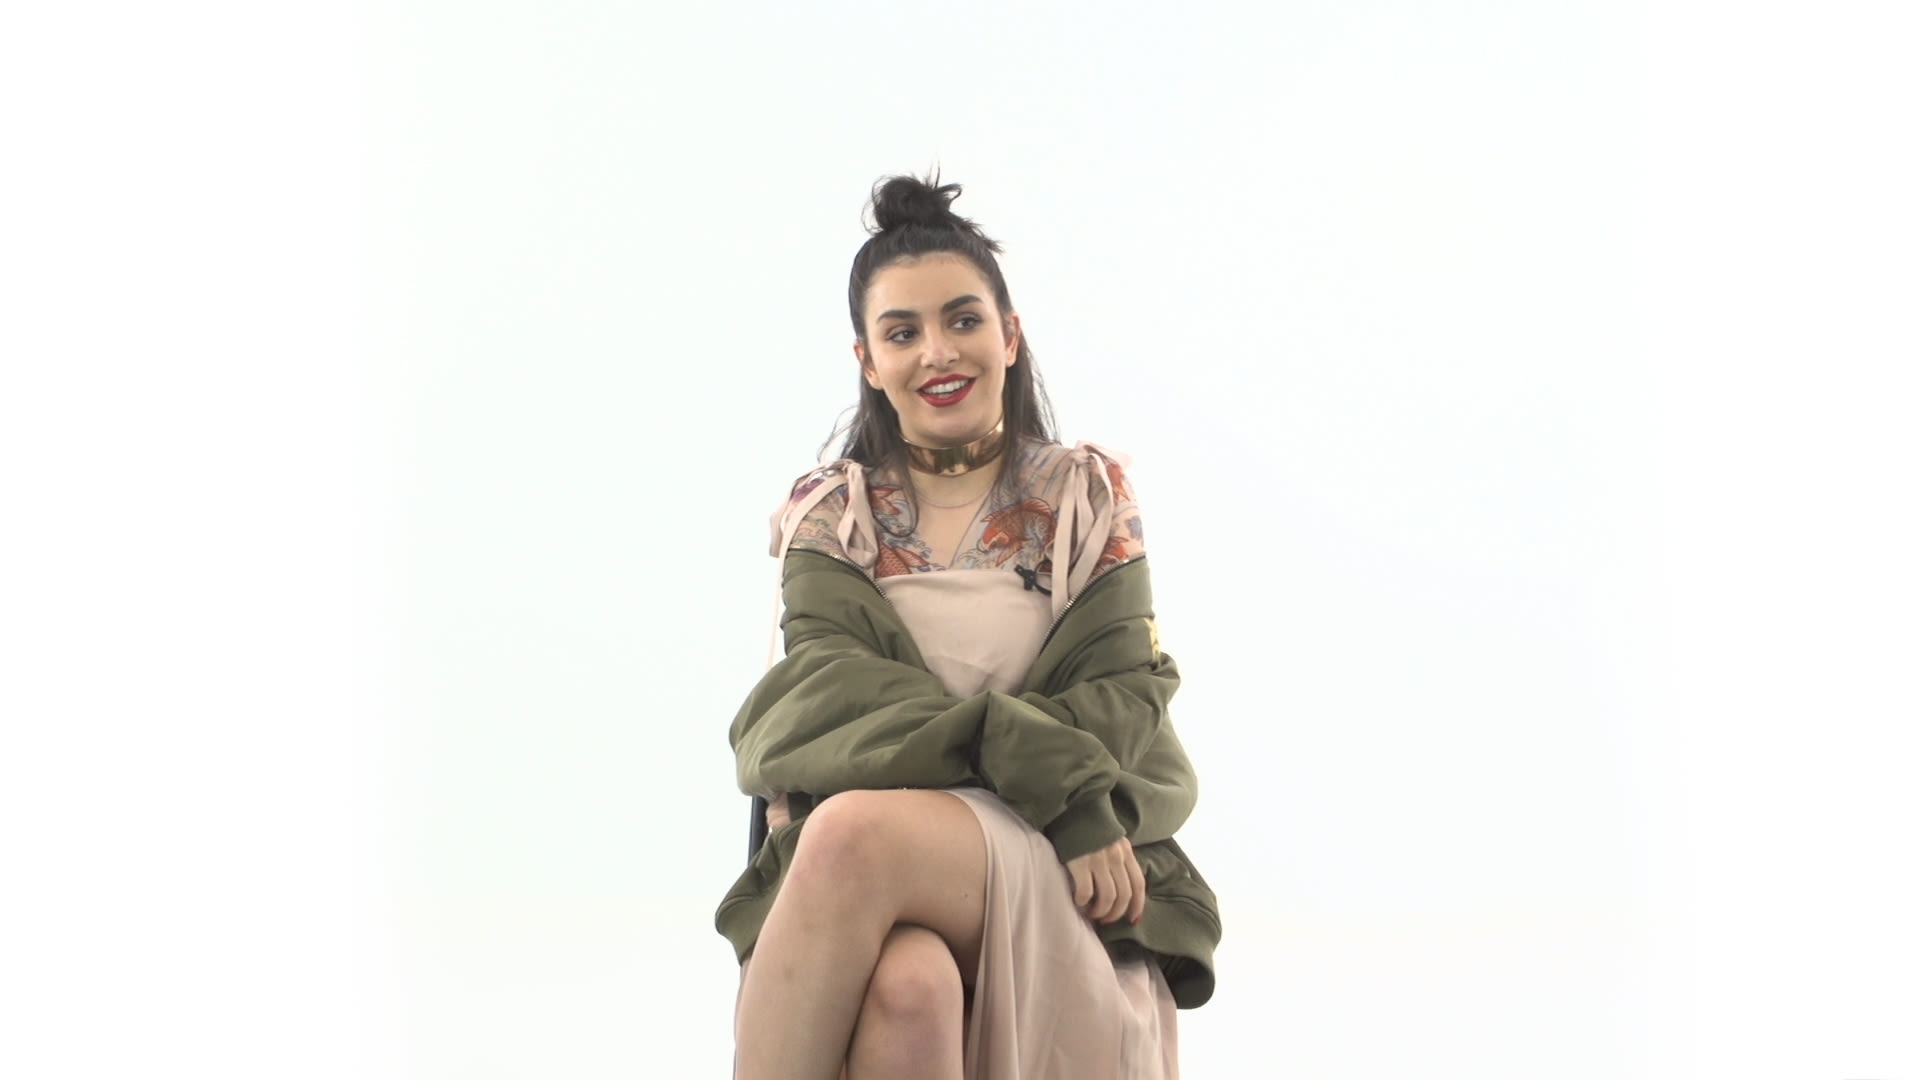 X Xcx Video - Watch Charli XCX Rates Virtual Reality, the Coffin Emoji and Pitchfork |  Over/Under | Pitchfork